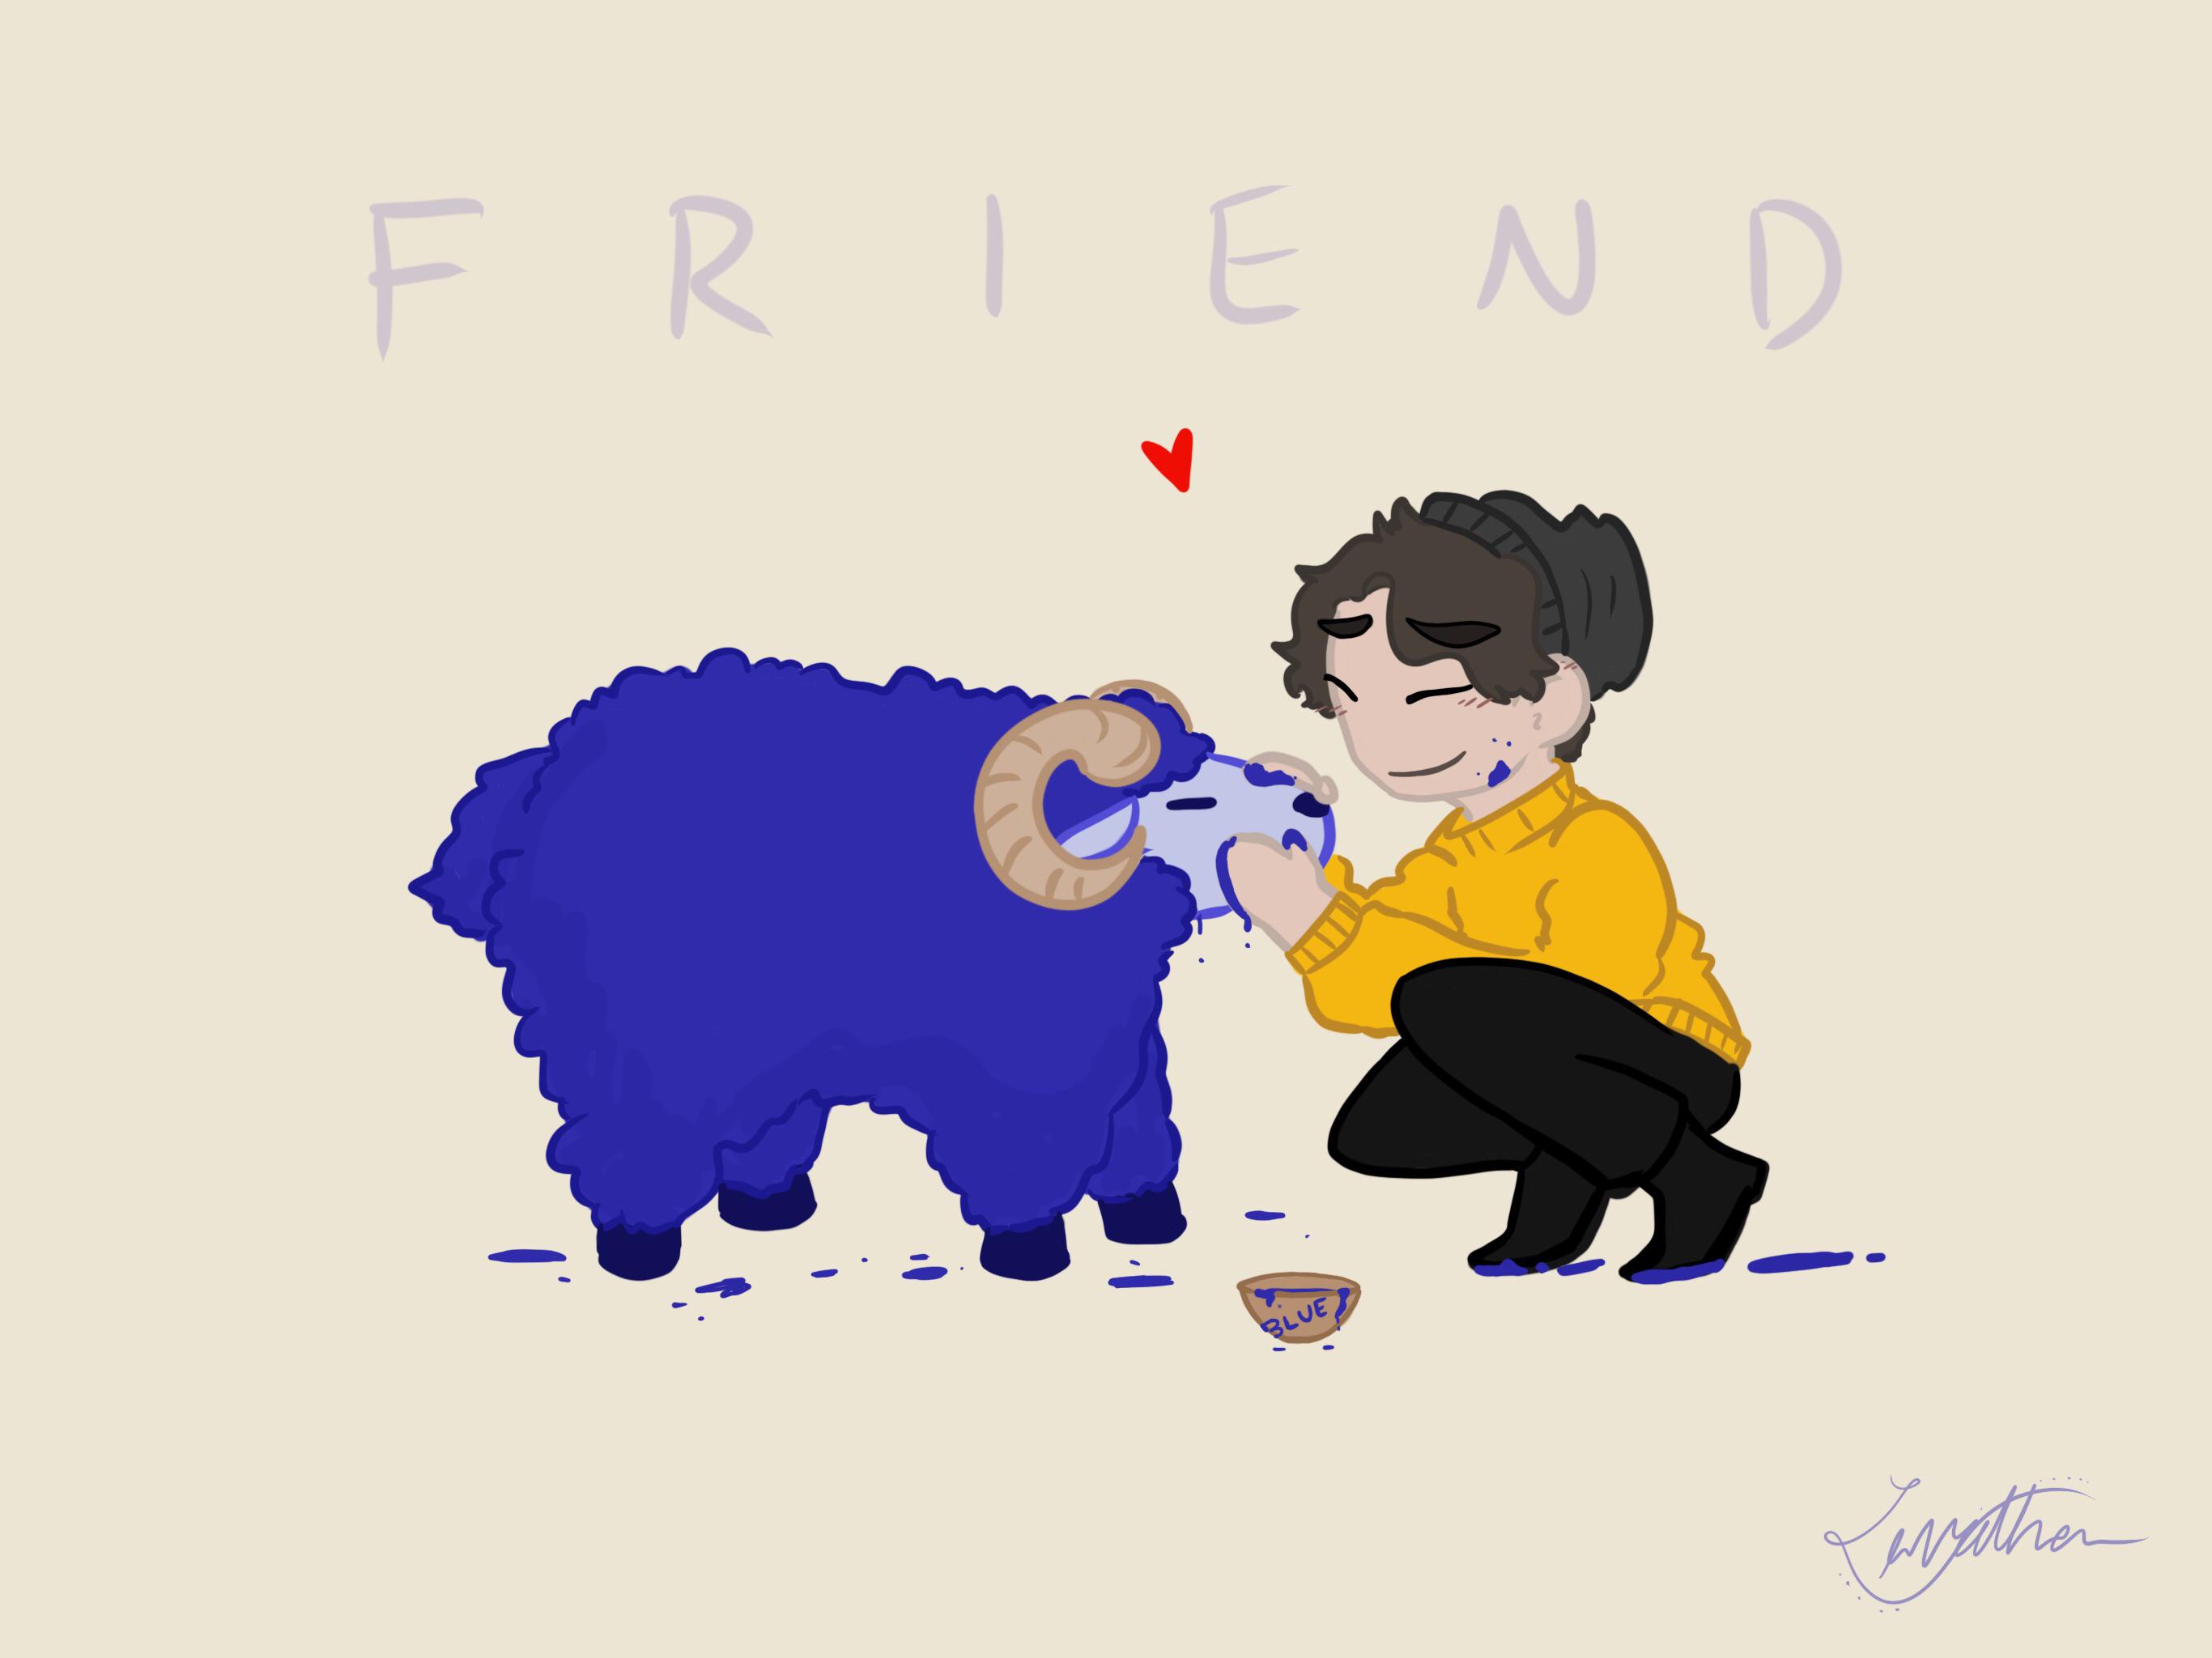 This is a drawing of Ghostbur and Friend. Ghostbur is crouched down, petting Friend's face. There is a bowl of blue dye labeled blue and splotches of blue all over the ground and over Ghostbur's hands. The word Friend is written above them with a small red heart underneath.